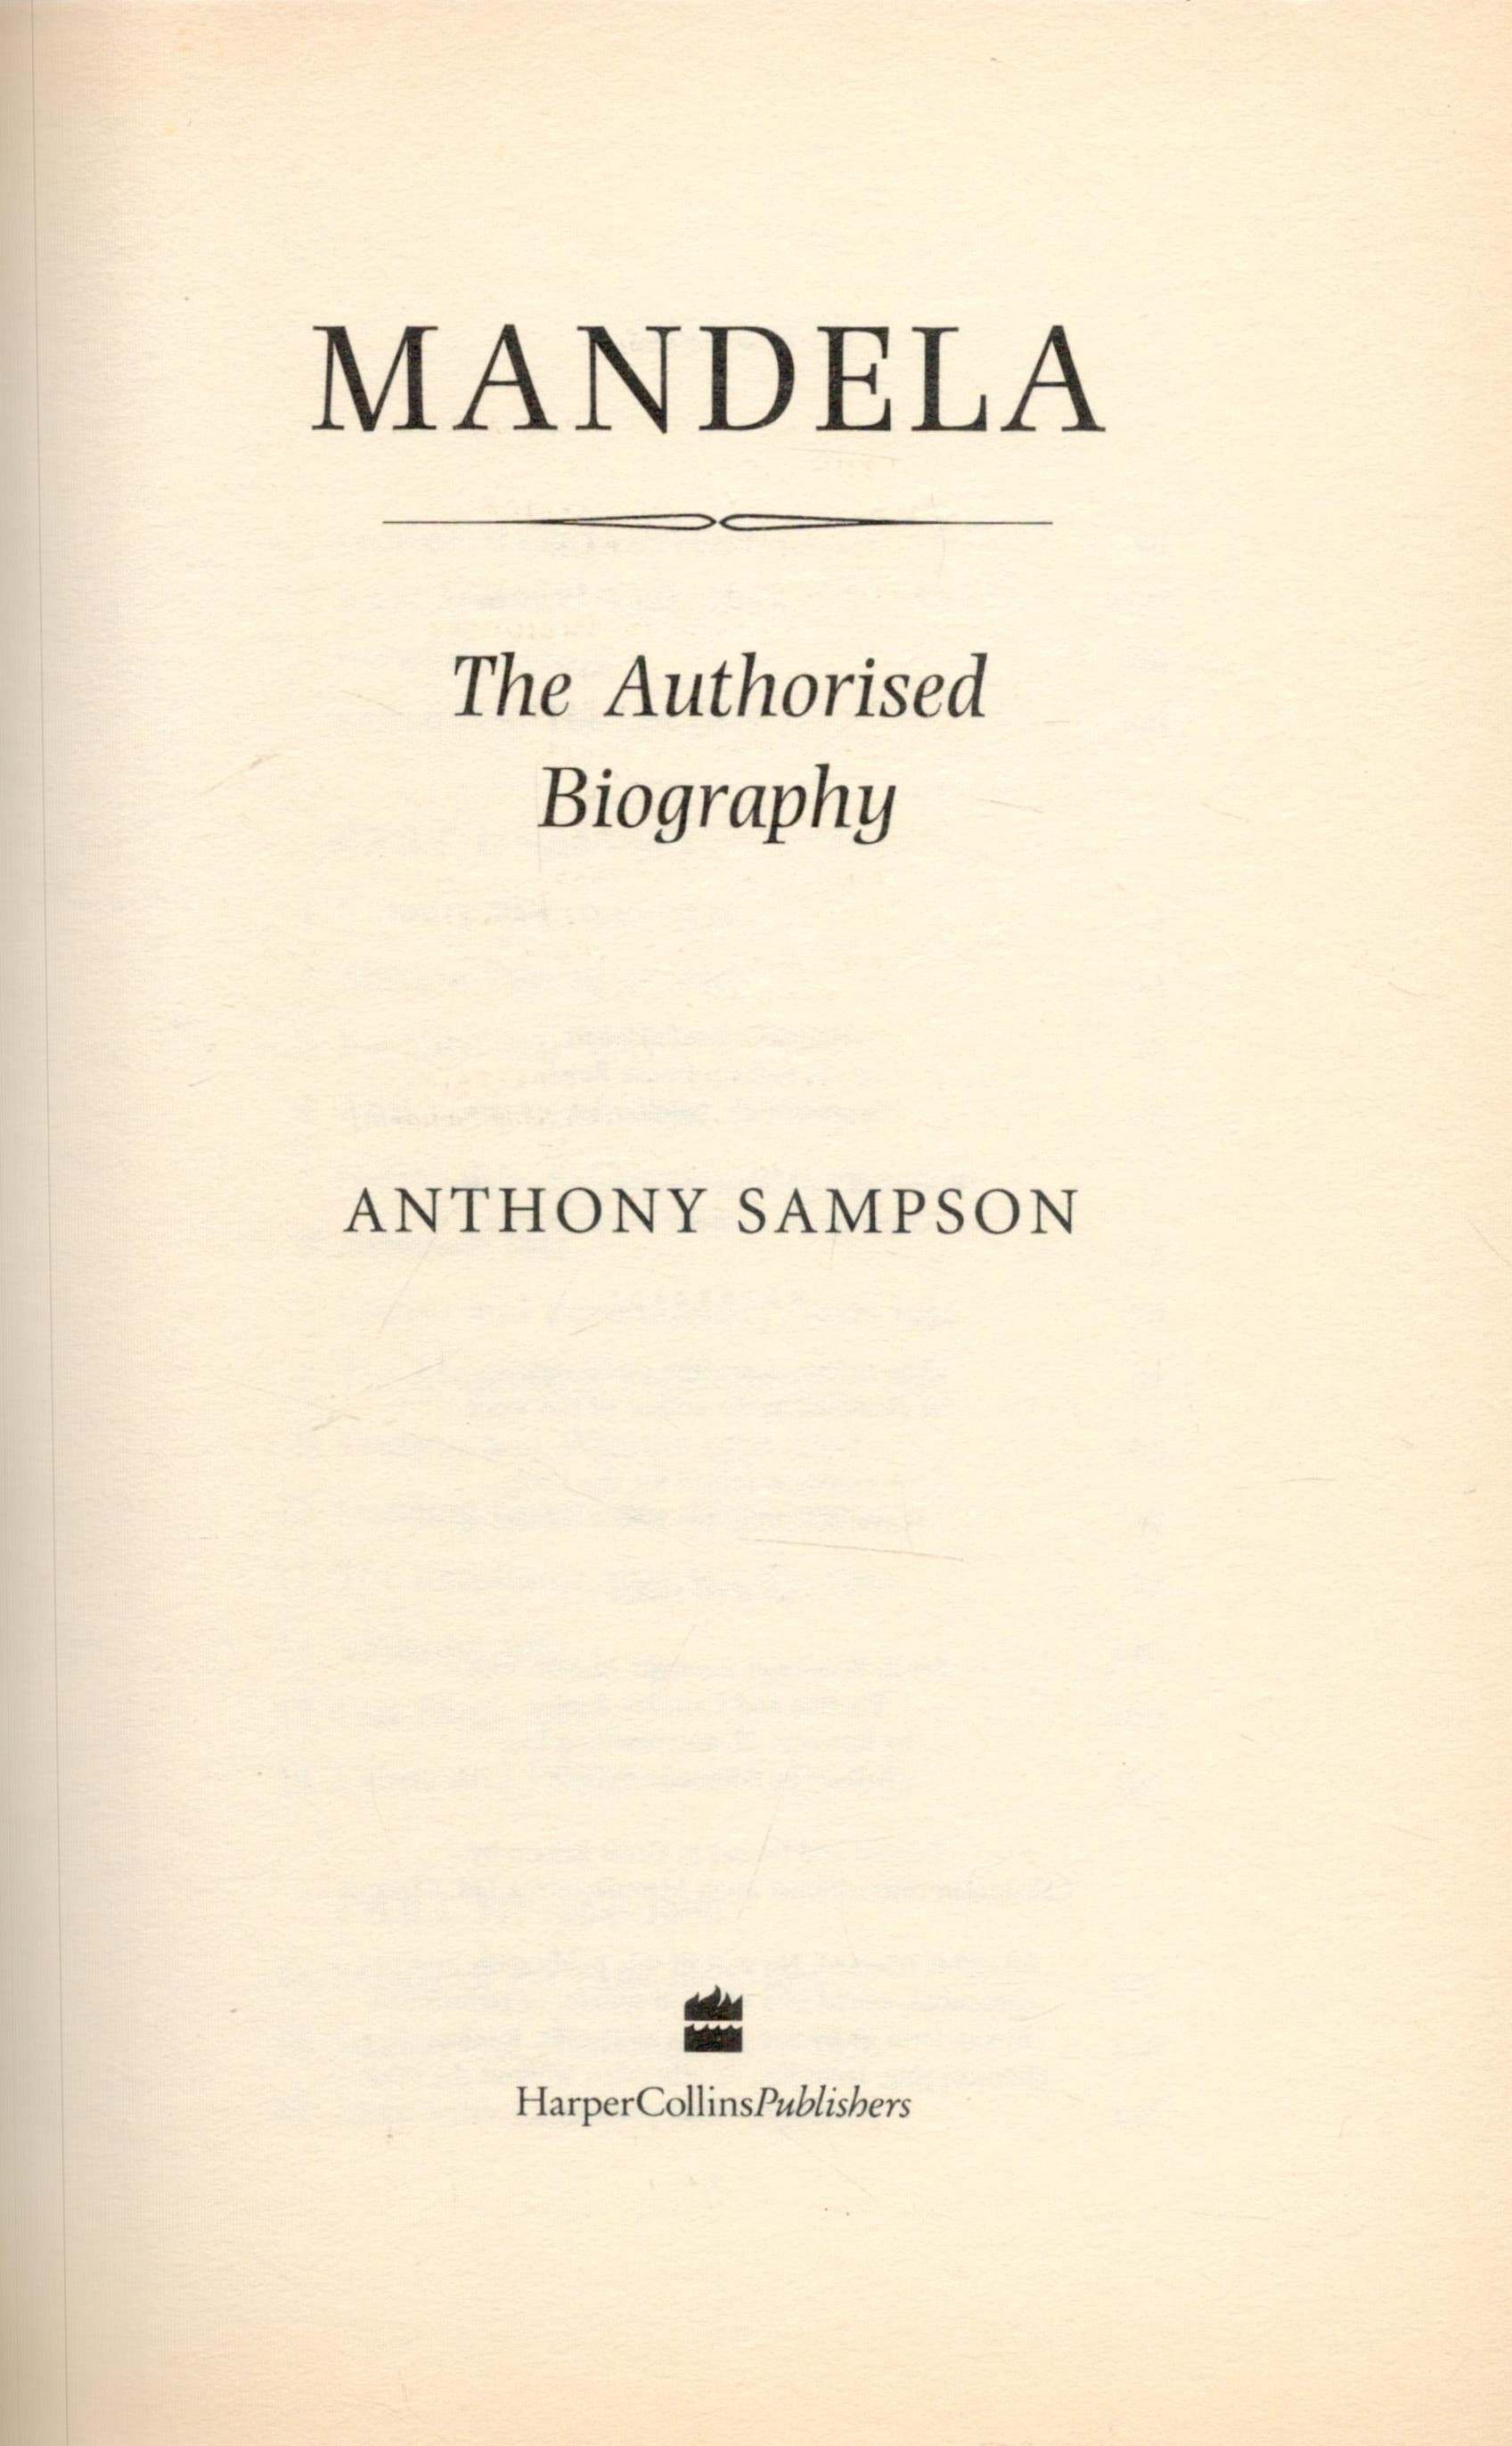 Mandela - The Authorised Biography by Anthony Sampson 1999 First Edition Hardback Book with 678 - Image 2 of 3